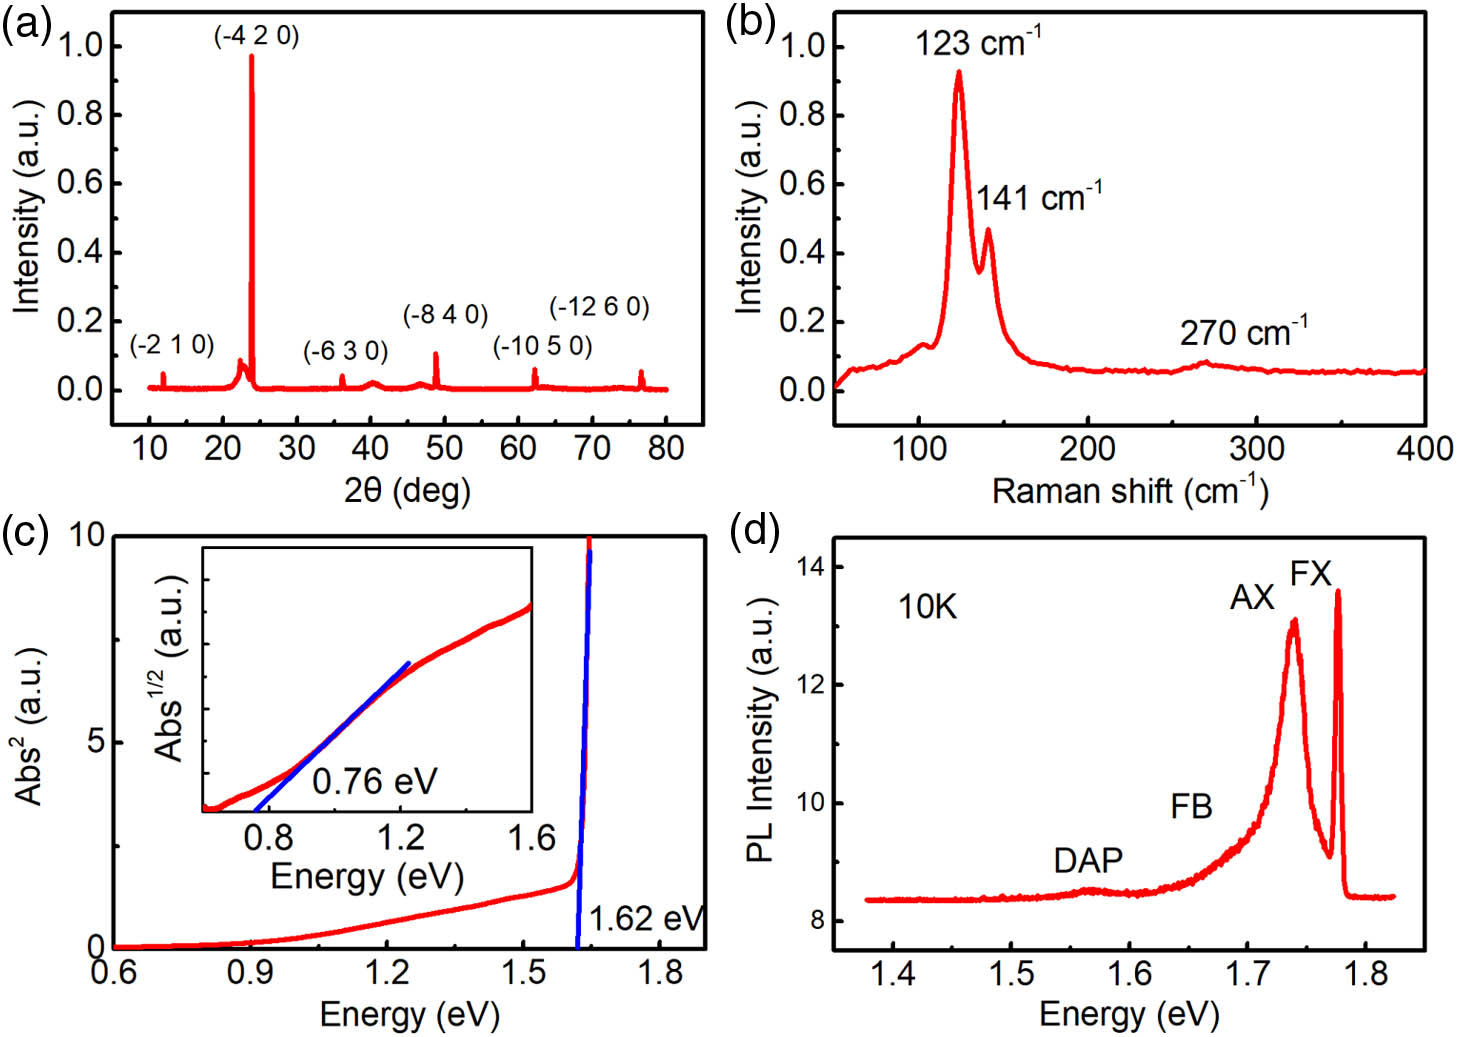 Characterization of the GaTe crystal by (a) an XRD spectrum; (b) a Raman spectrum with a laser wavelength of 785 nm; (c) optical absorption spectra, with the excitonic absorption observed around 1.62 eV. Inset in (c) shows square root of the absorption as a function of energy, where the linear extrapolation reveals an optical bandgap of 0.76 eV, associated with an indirect bandgap; (d) PL spectrum of GaTe at 10 K under 488 nm laser excitation.